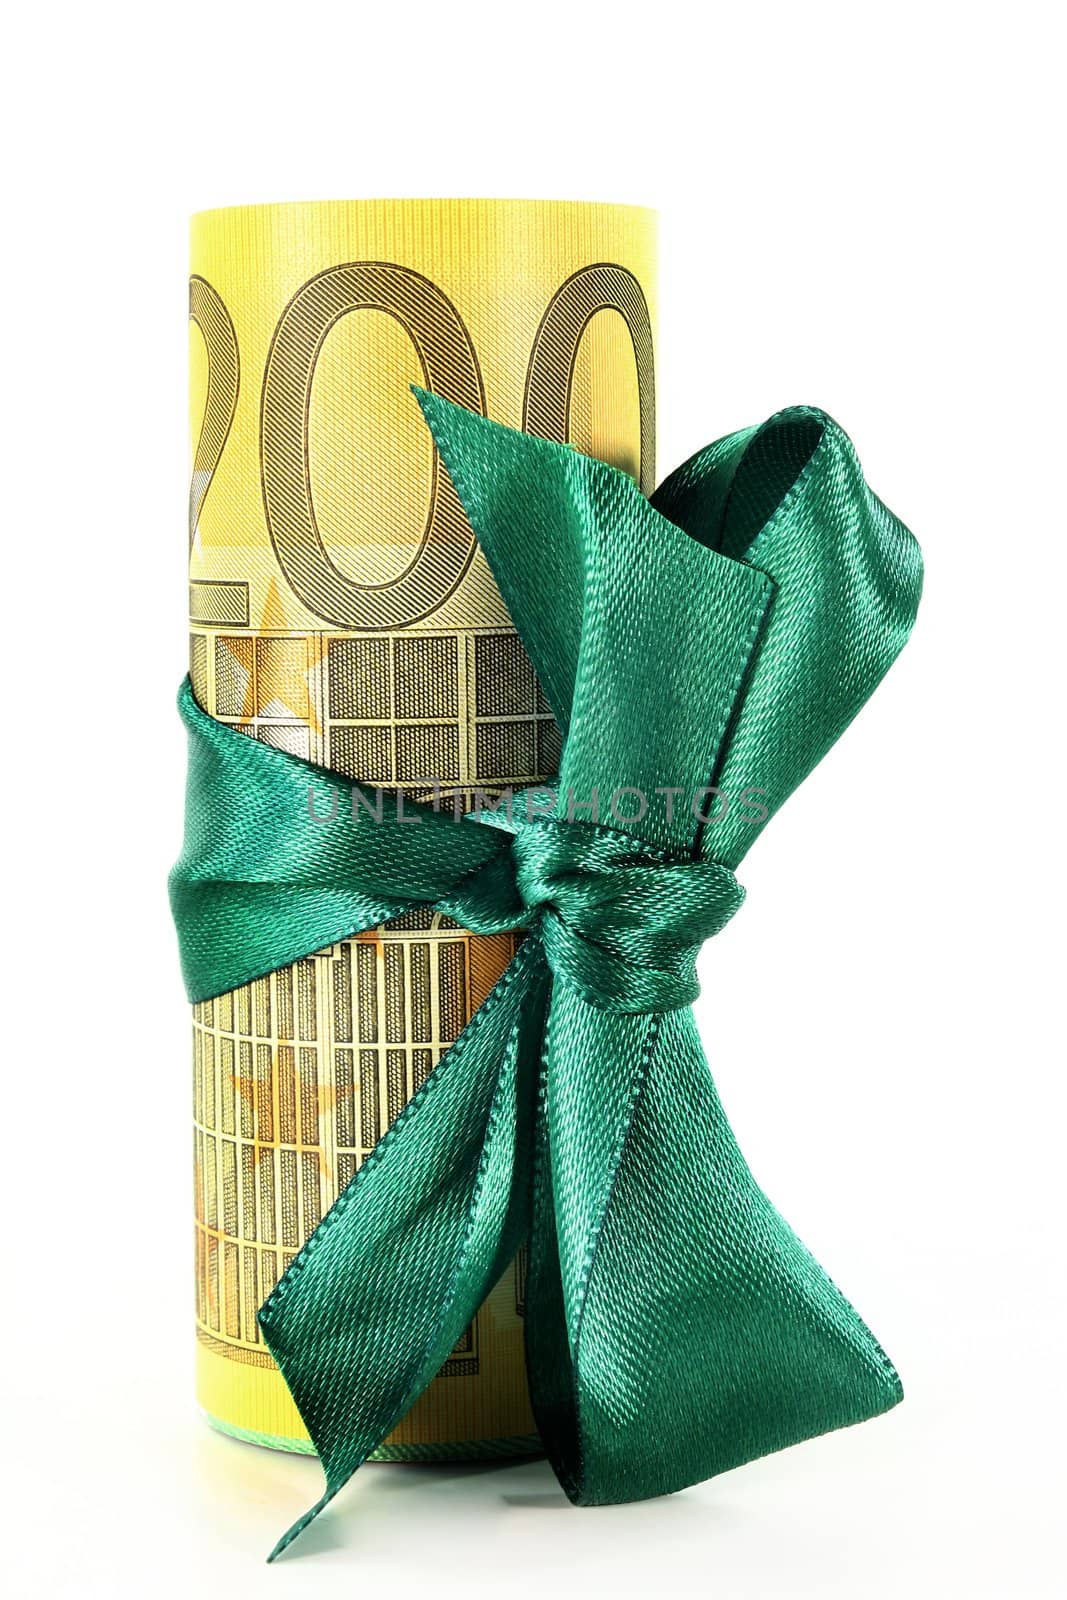 Rolled euro notes with a green ribbon